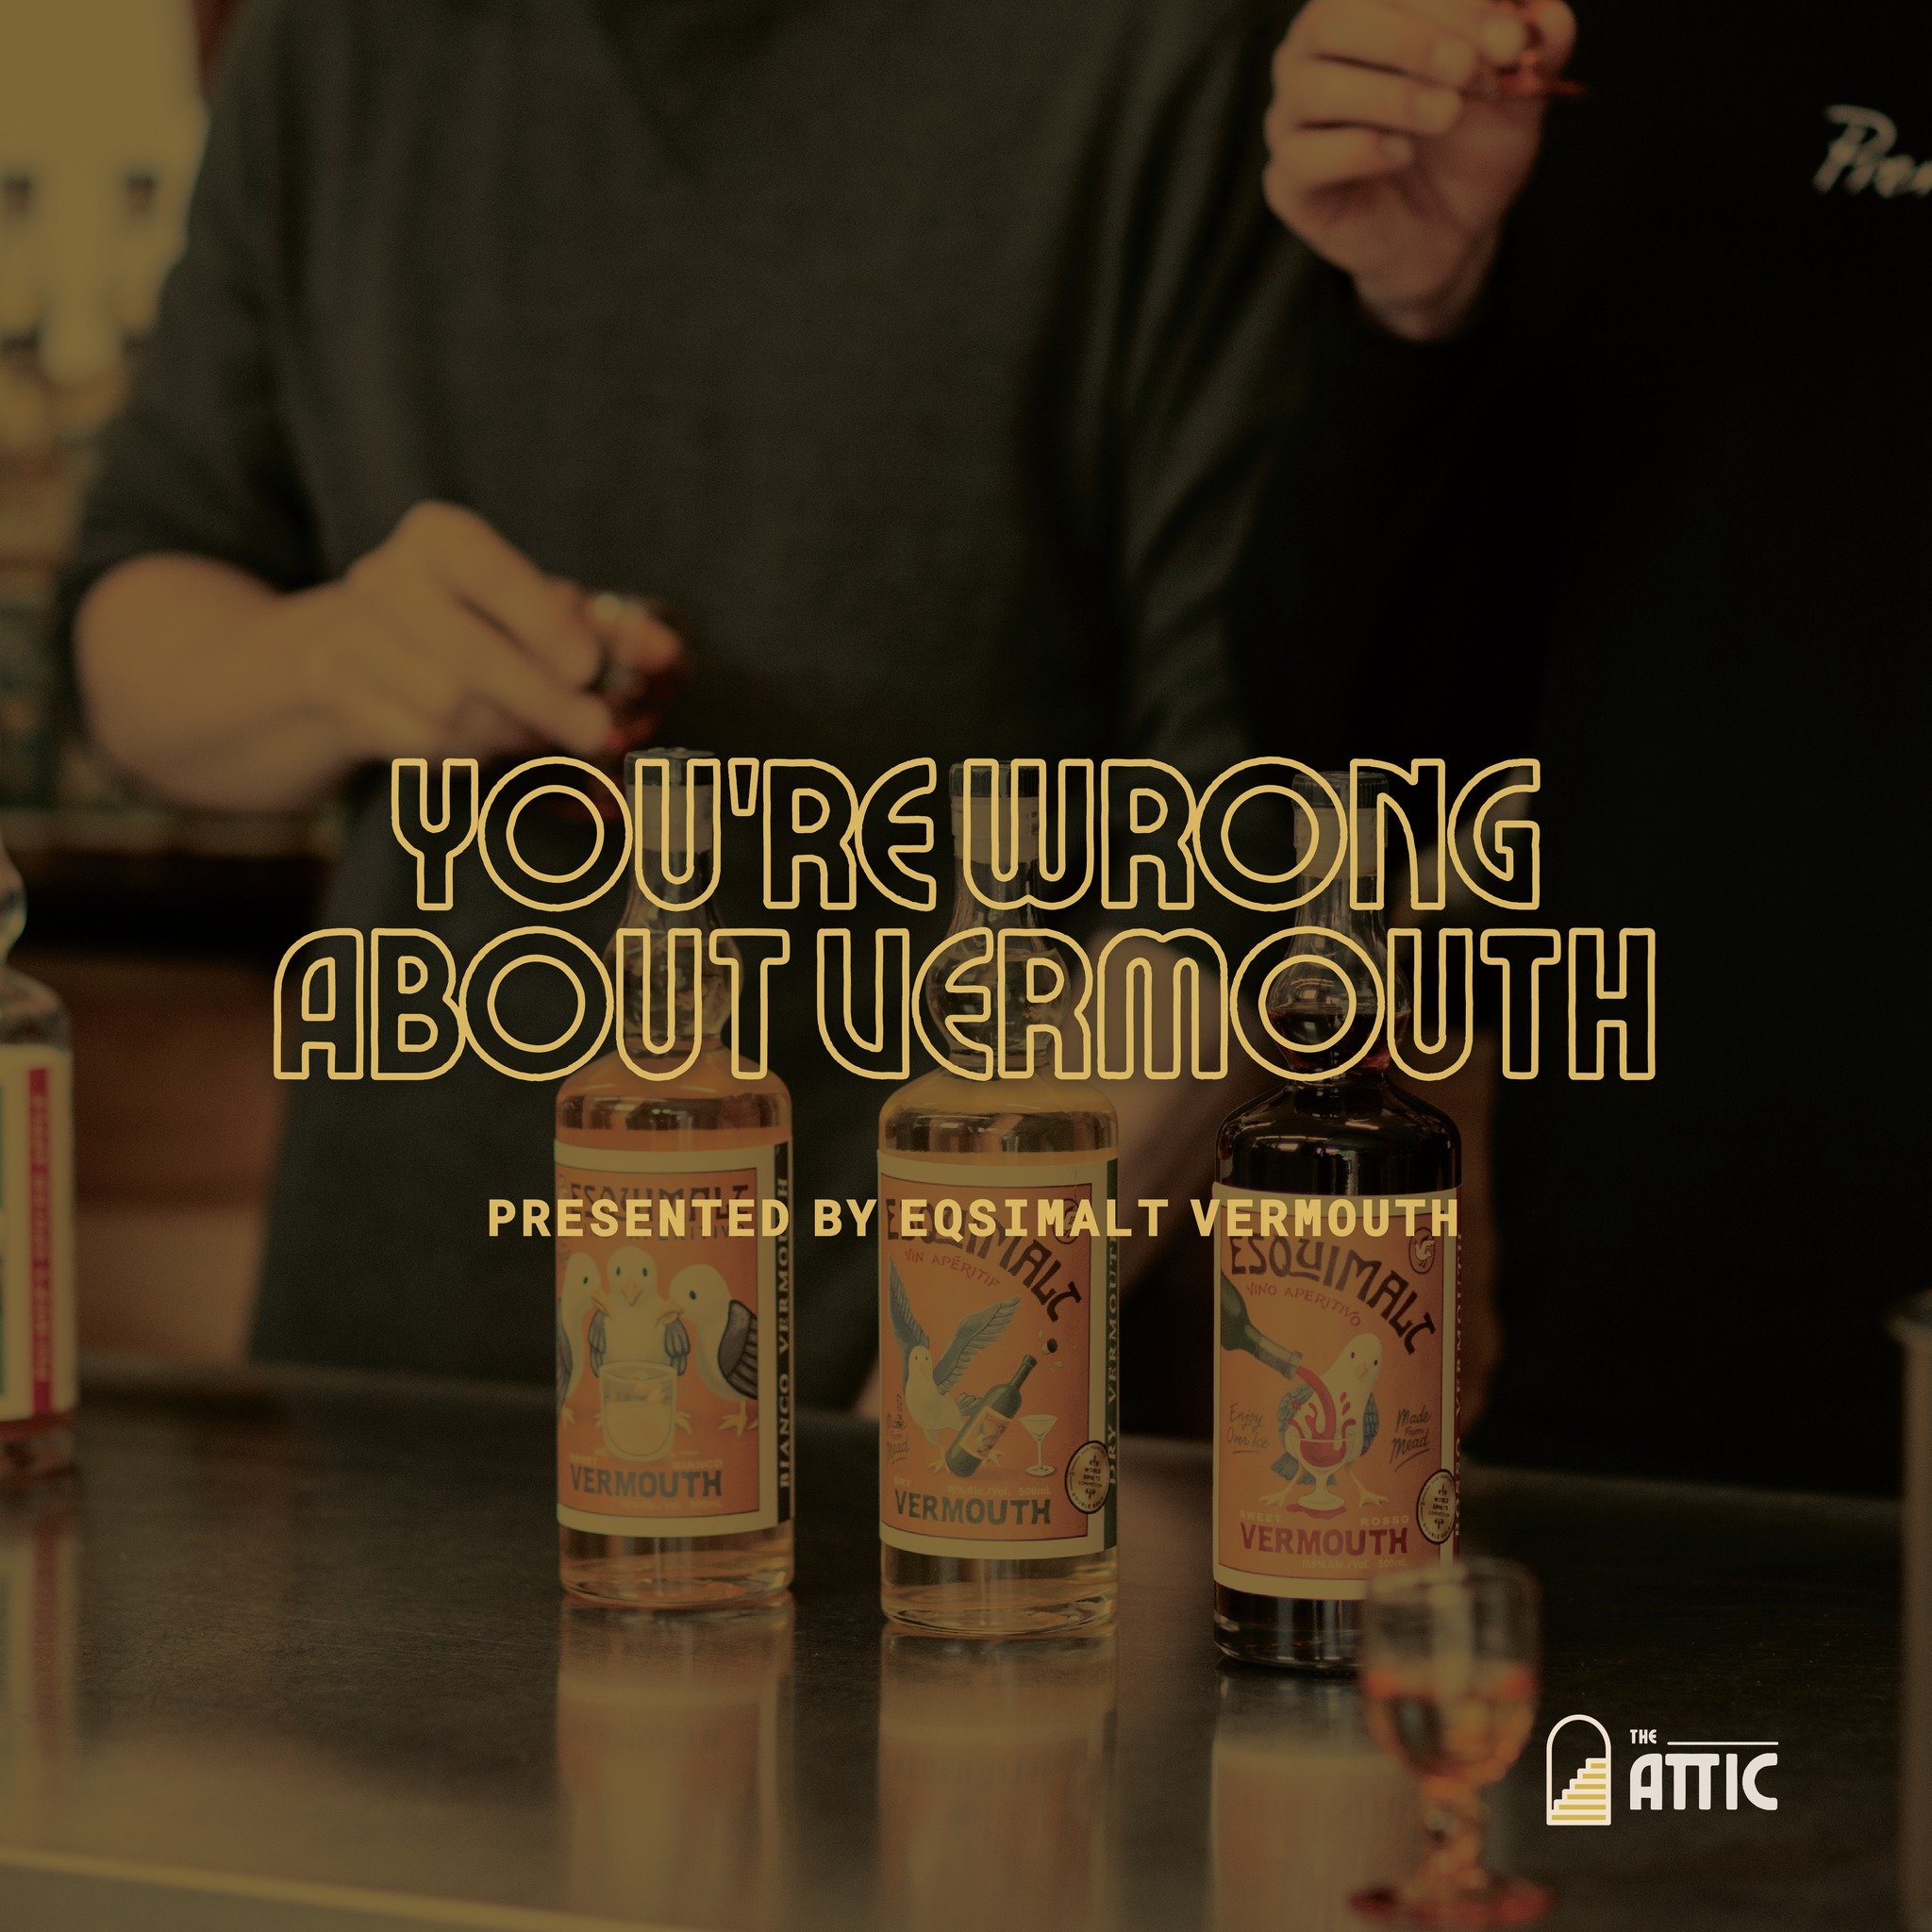 YOU&rsquo;RE WRONG ABOUT VERMOUTH
Hosted by @esquimaltvermouth 

$15 TICKET- LIMITED SEATS AVAILABLE
A history lesson you&rsquo;re going to want to be at. Join us for a fun and fascinating masterclass on an age-old spirit, Vermouth. Don&rsquo;t worry